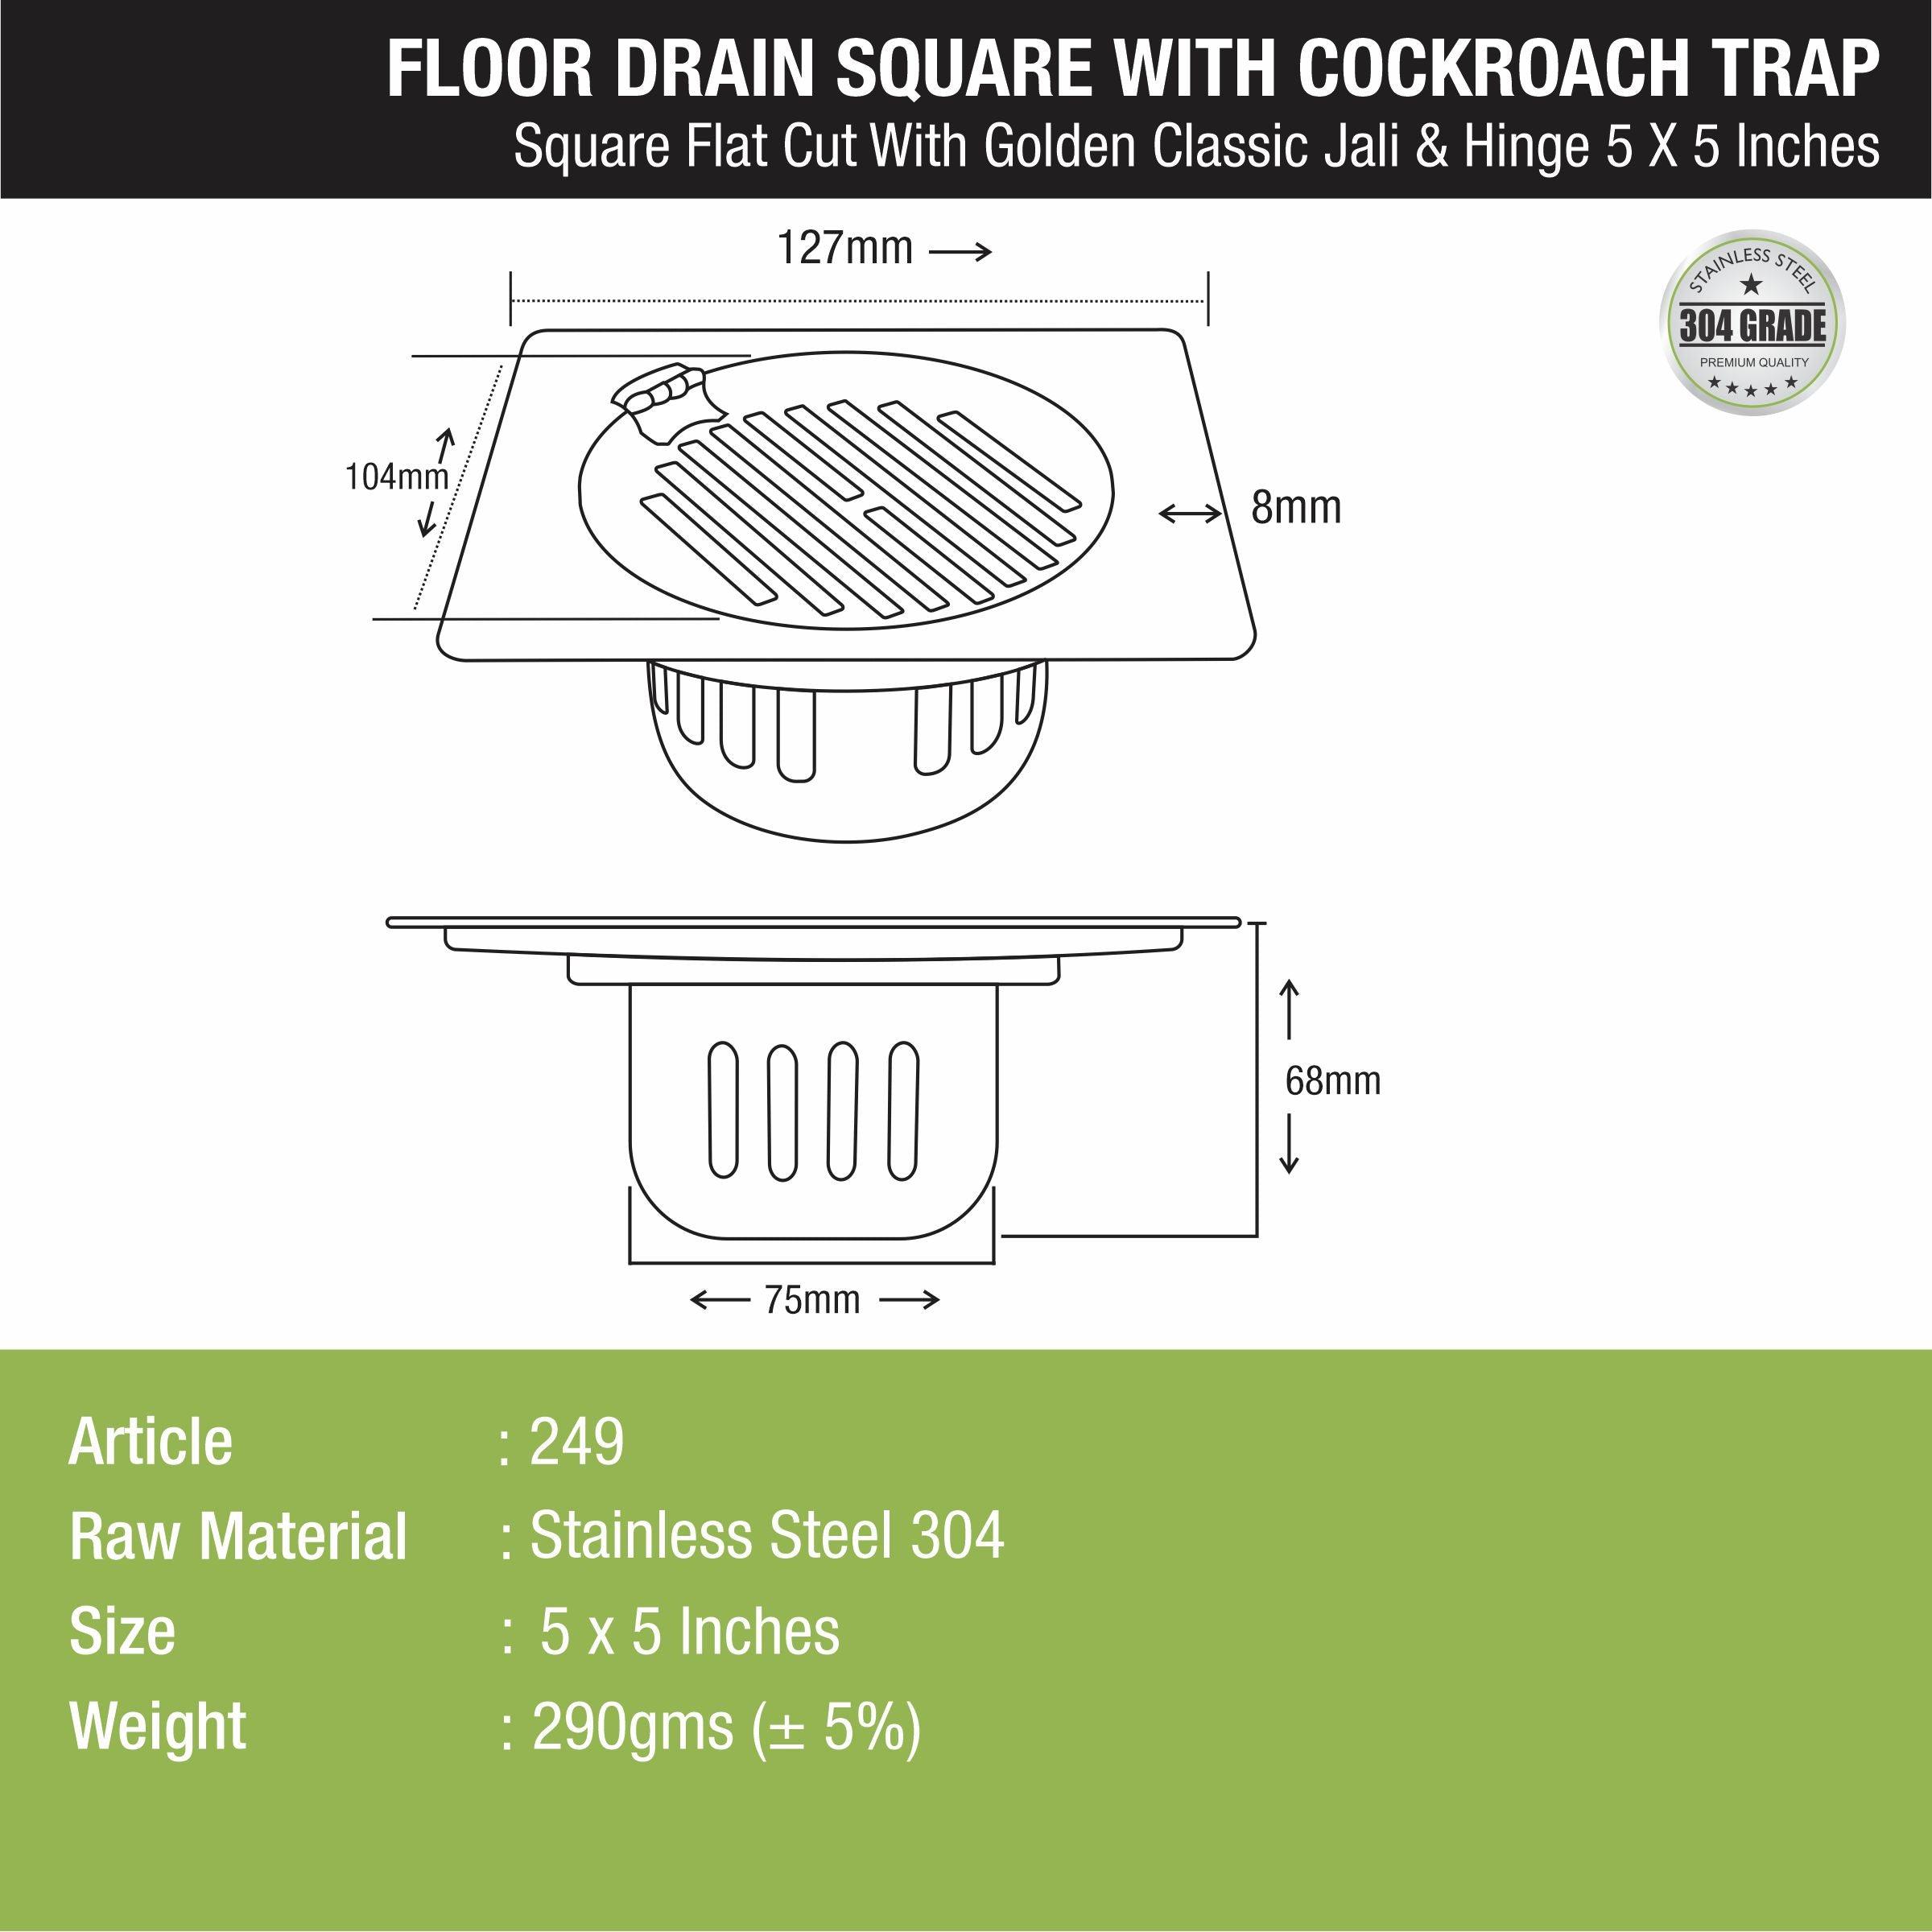 Golden Classic Jali Square Flat Cut Floor Drain (5 x 5 Inches) with Hinge and Cockroach Trap - LIPKA - Lipka Home